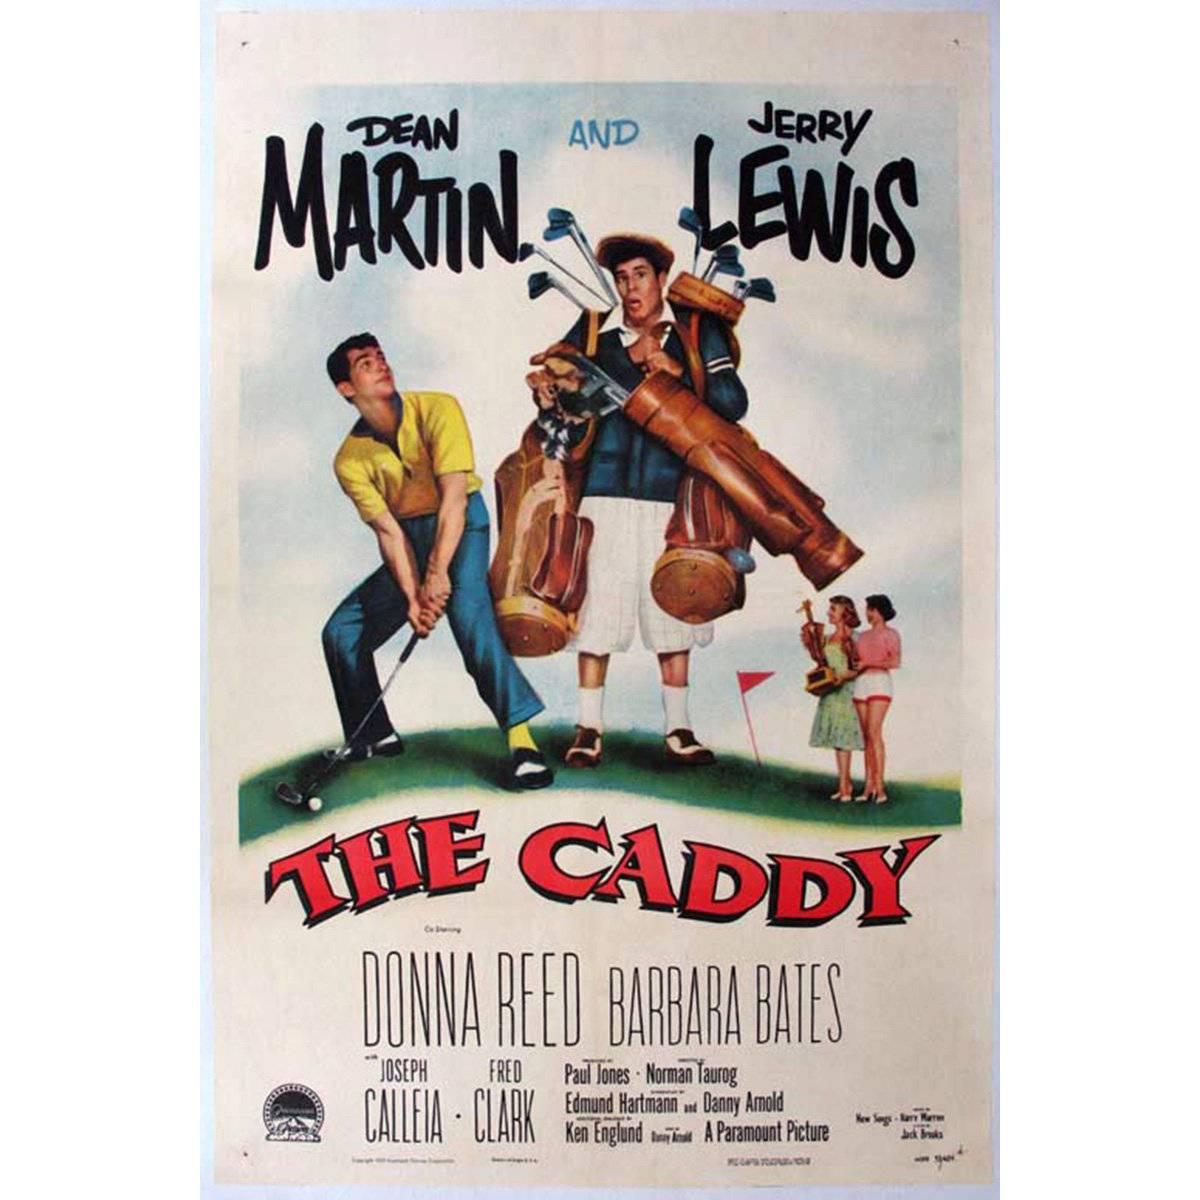 "The Caddy" Film Poster, 1953